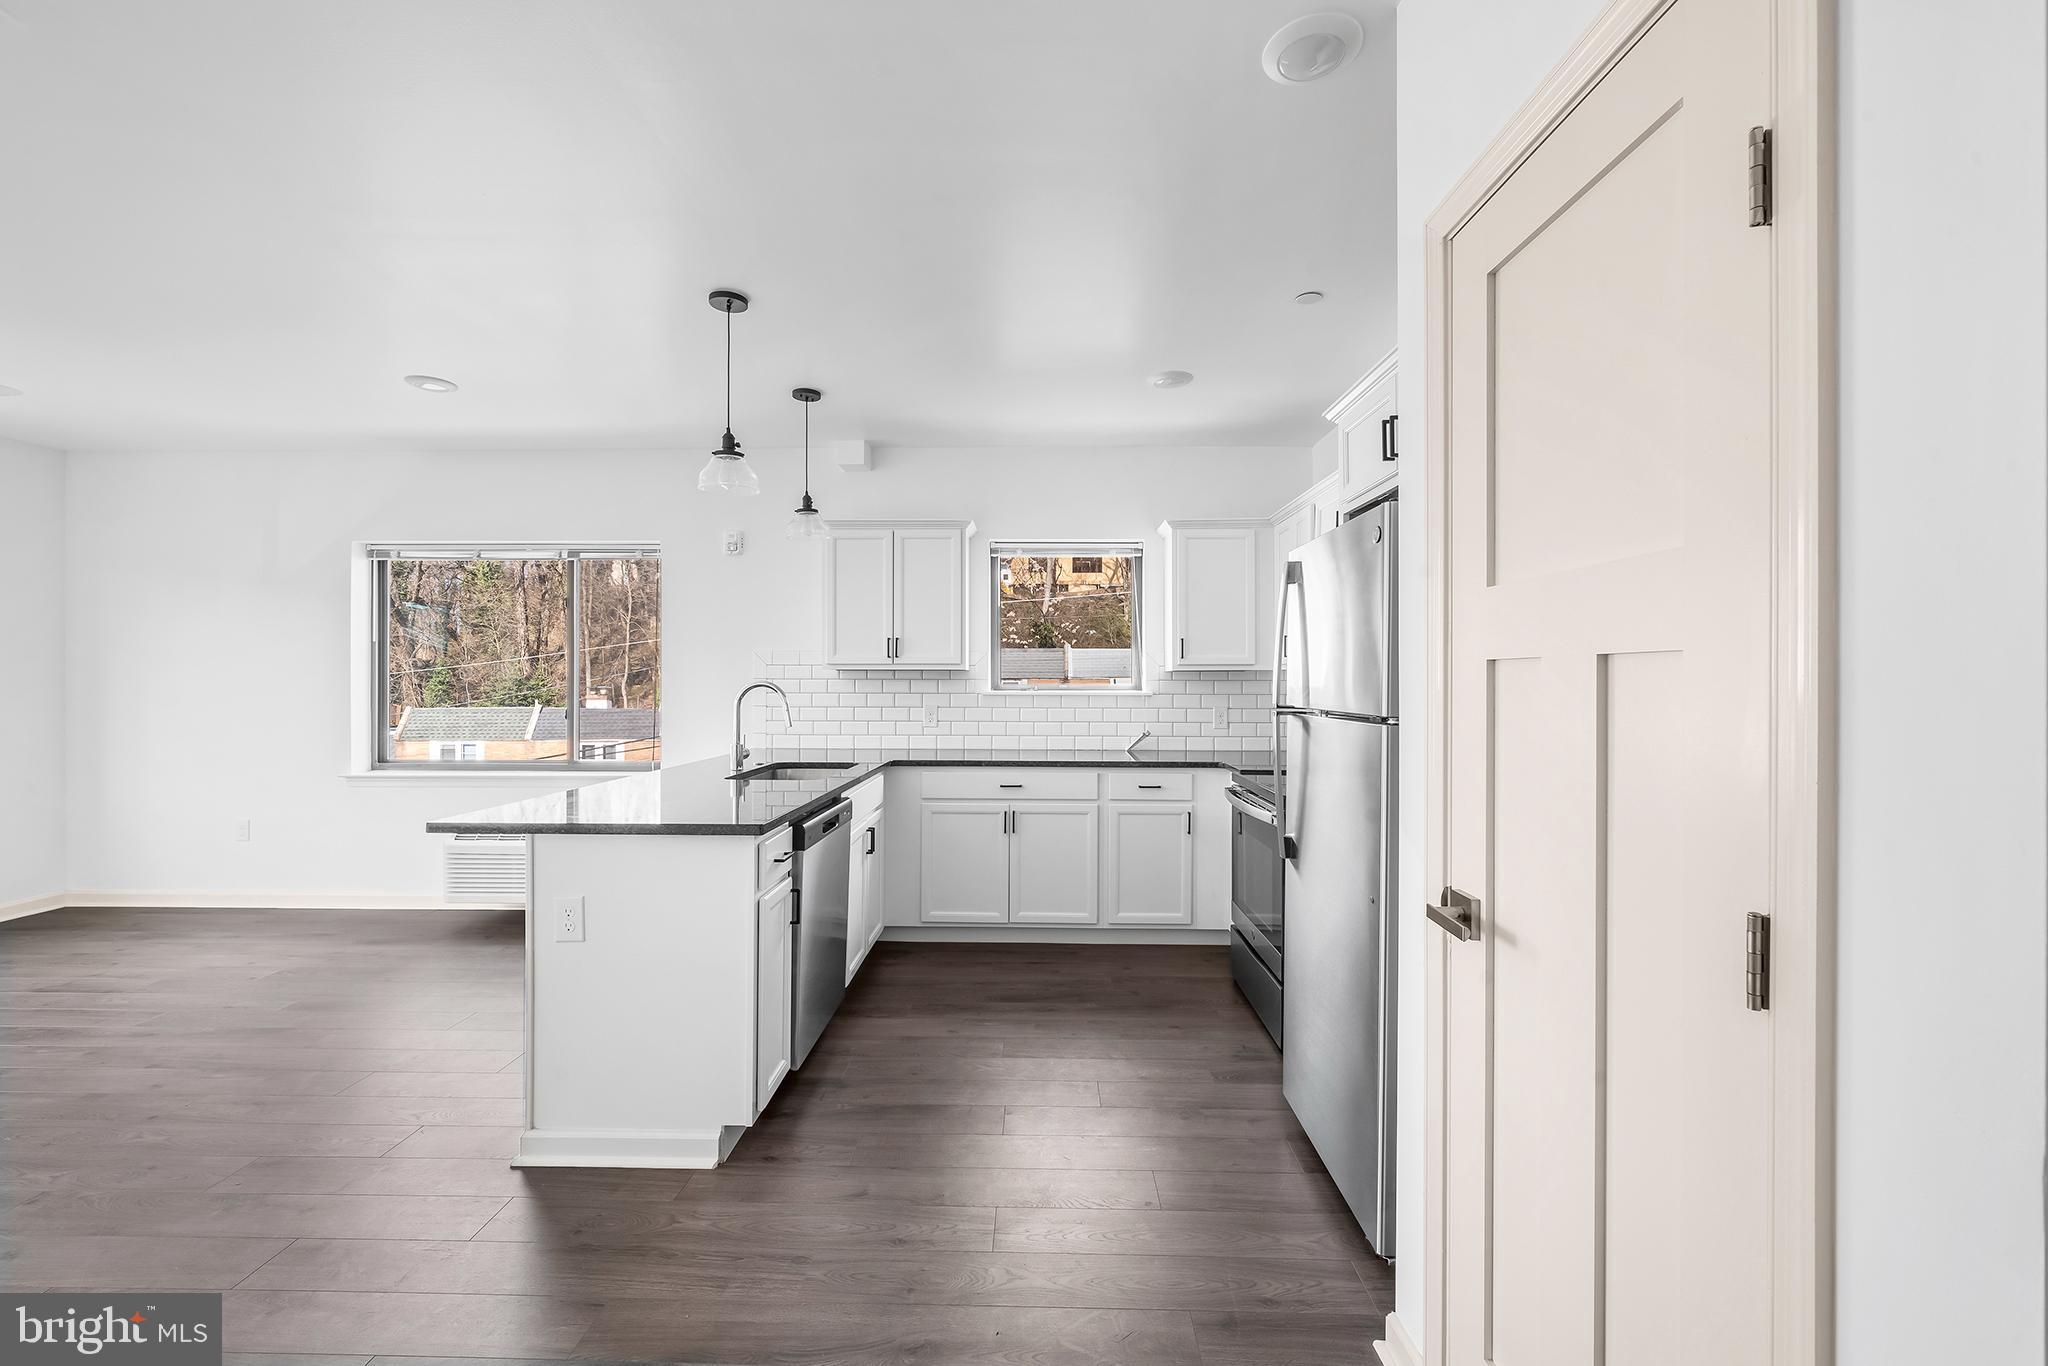 a kitchen with stainless steel appliances a refrigerator and white cabinets